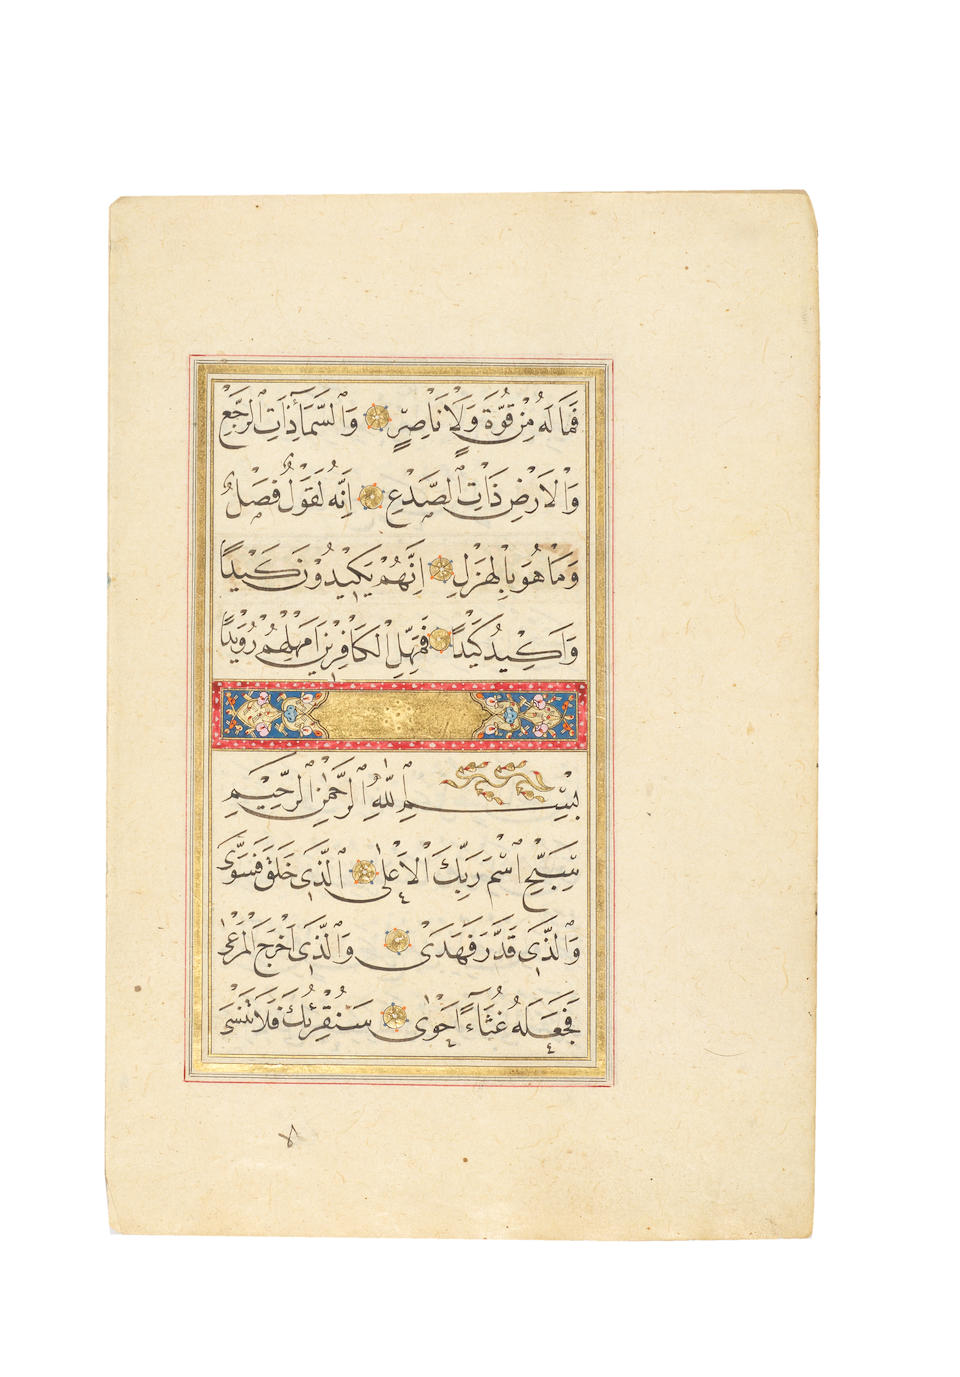 Selected suras from the Qur'an, copied by Isma'il al-Zuhdi, in the style of Shaykh Hamdullah, better known as Ibn al-Shaykh Ottoman Turkey, probably Constantinople, dated AH 1217/AD 1802-03